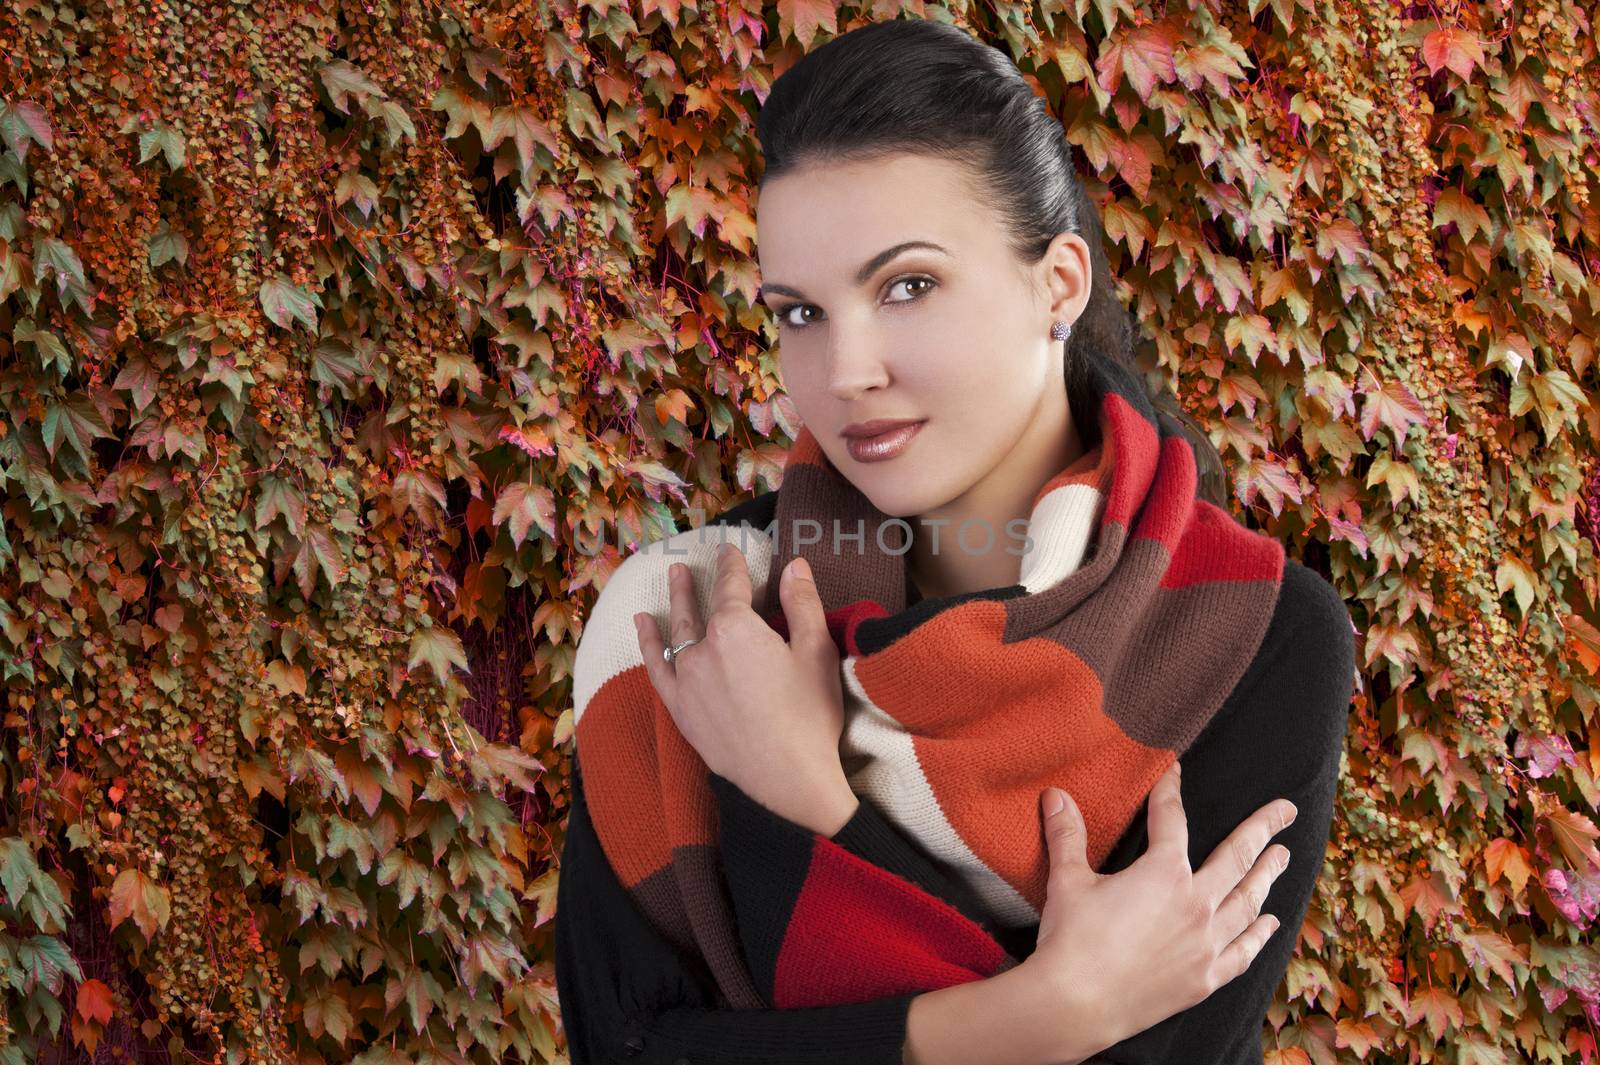 the autumn lady by fotoCD